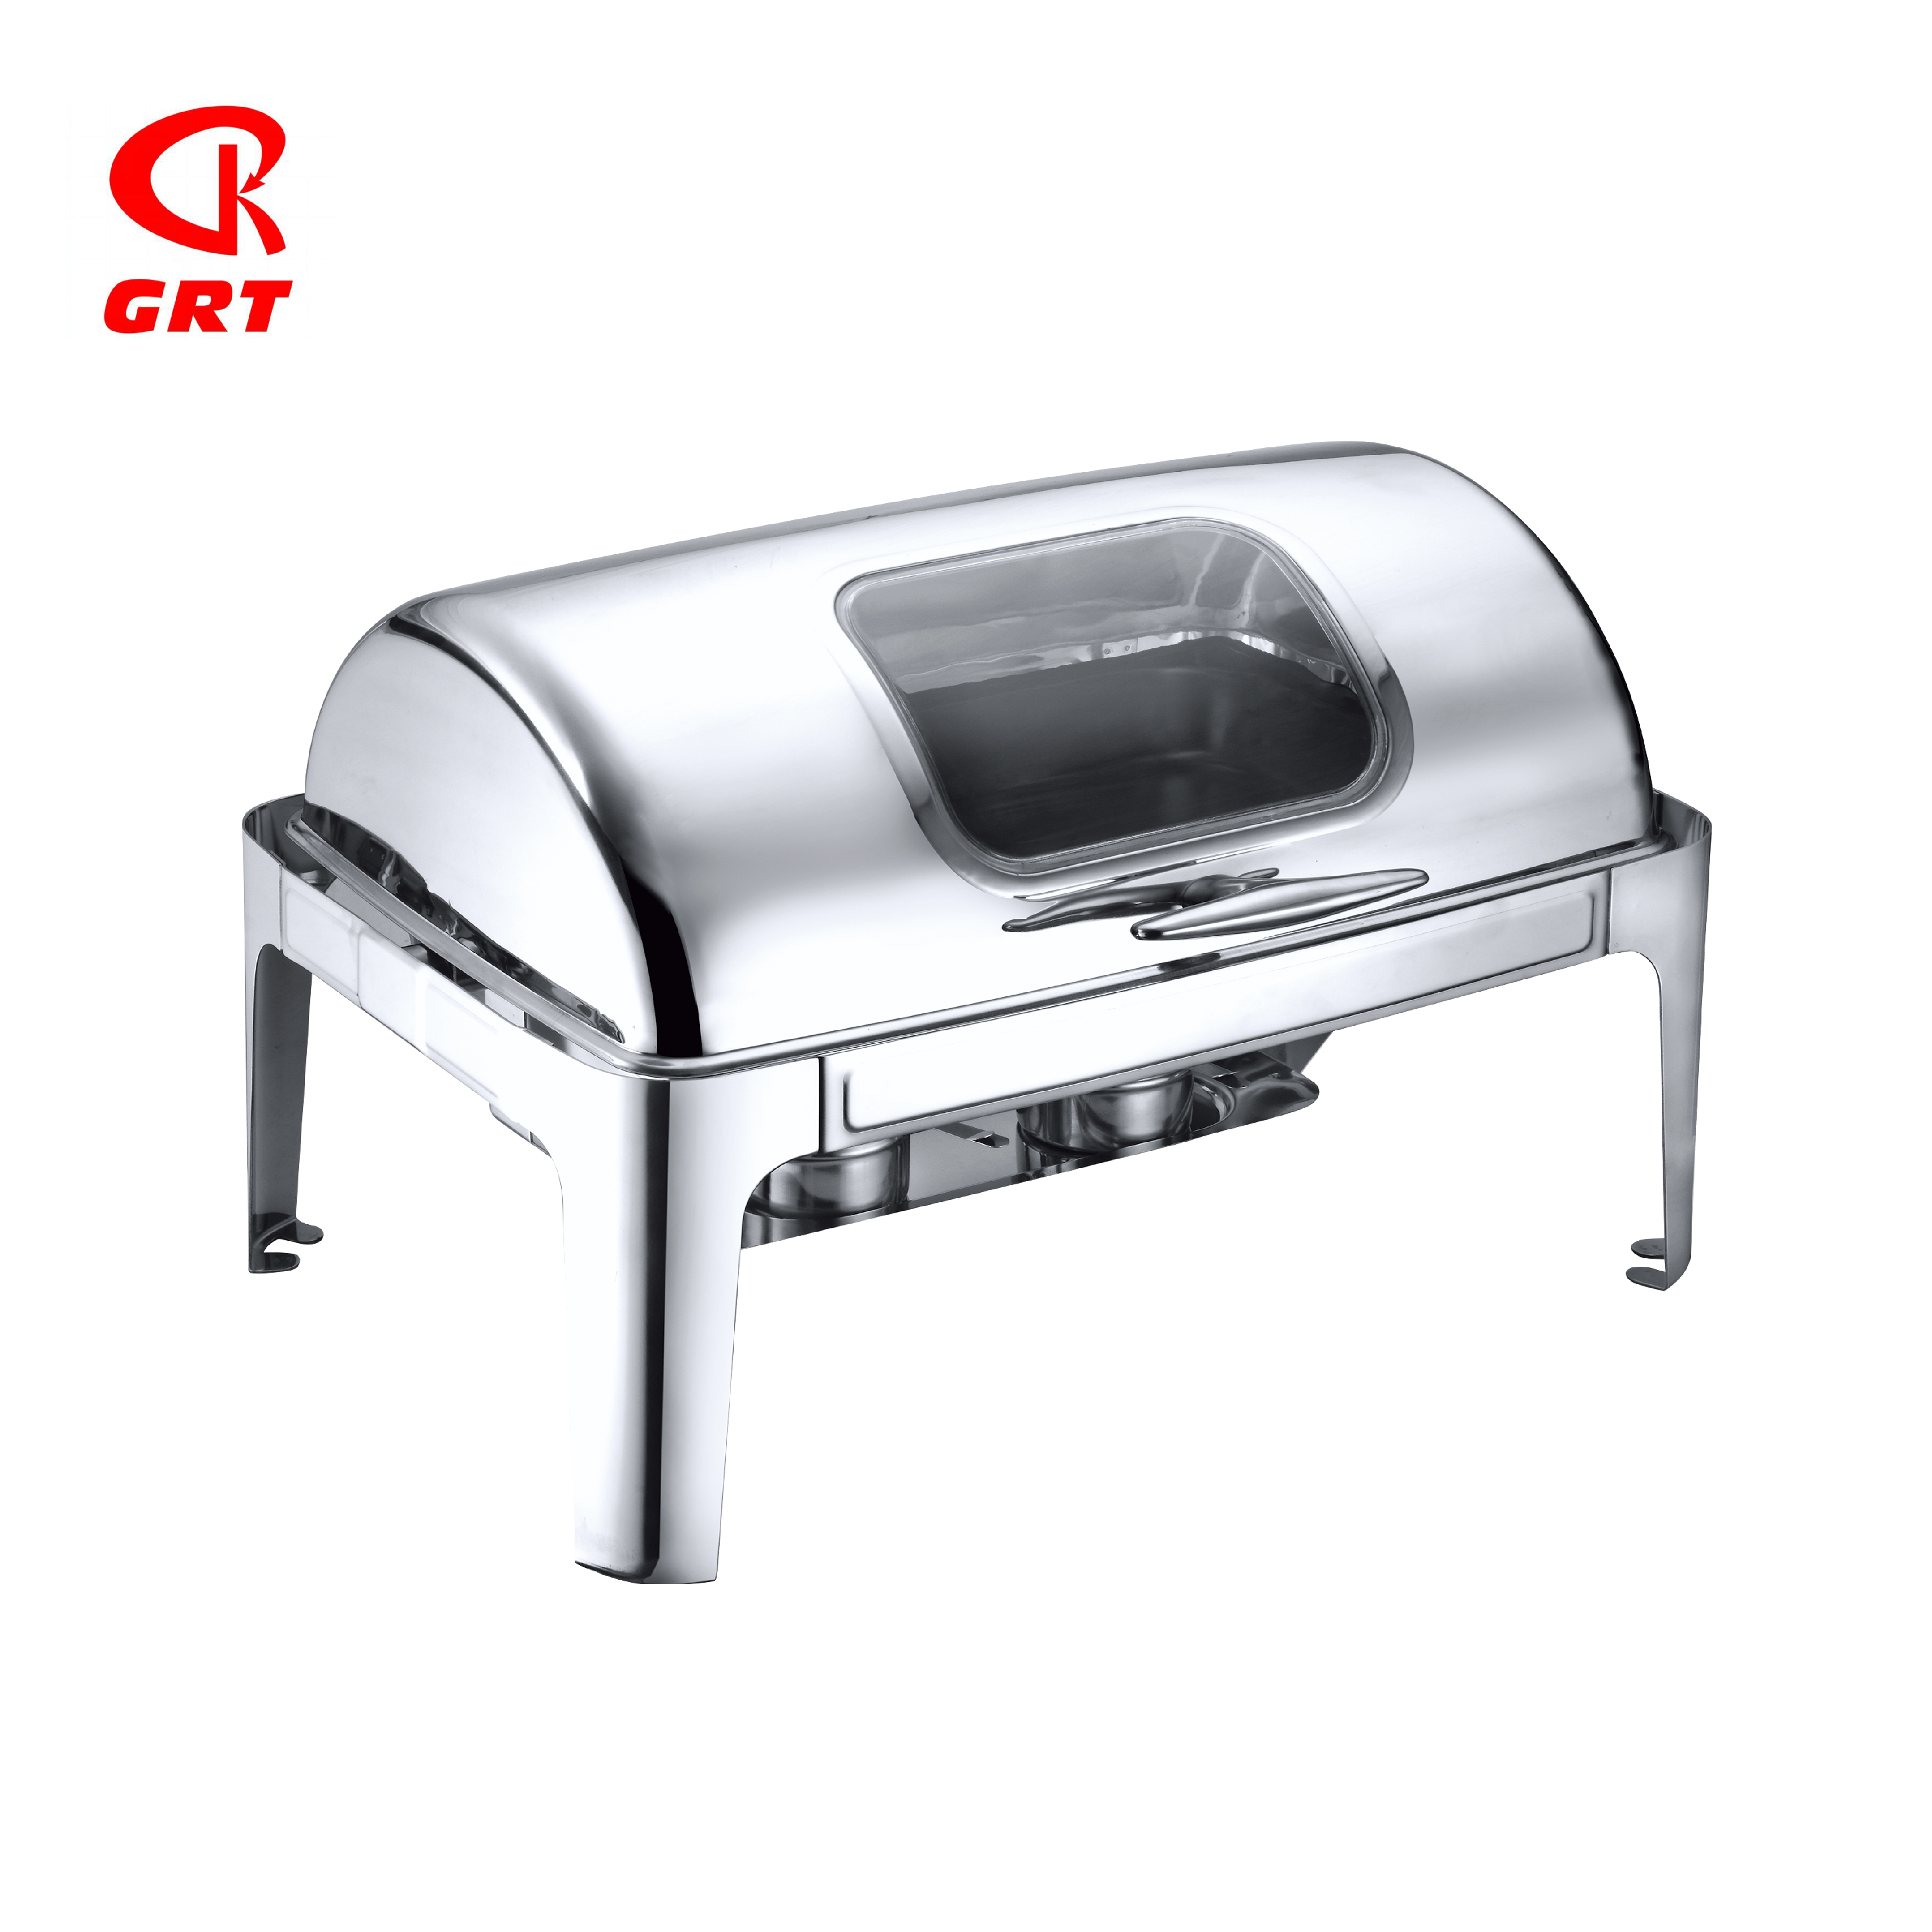 GRT-723KS 0.9mm Thick Visible Window Chafing Dish 9L